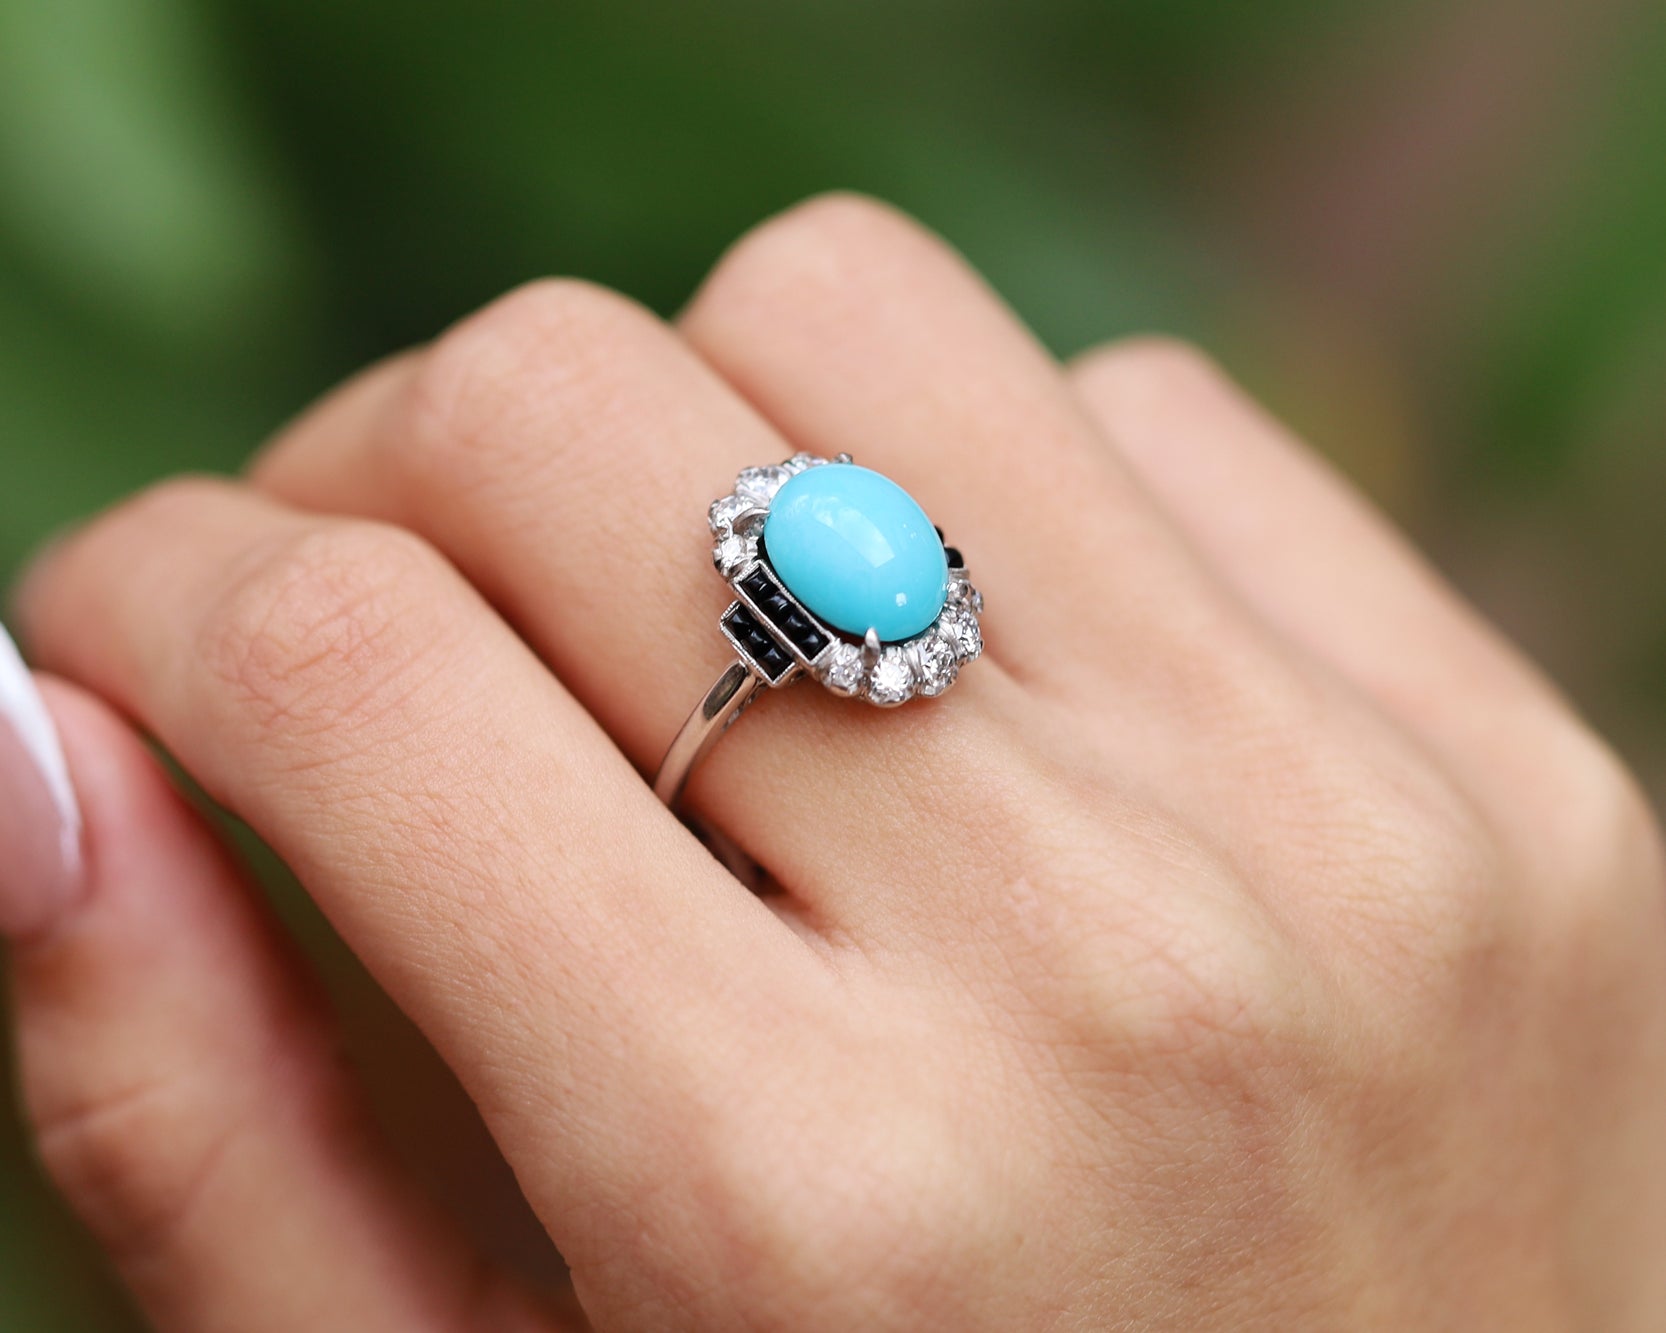 Art Deco Inspired Turquoise, Onyx and Diamond Cocktail Ring